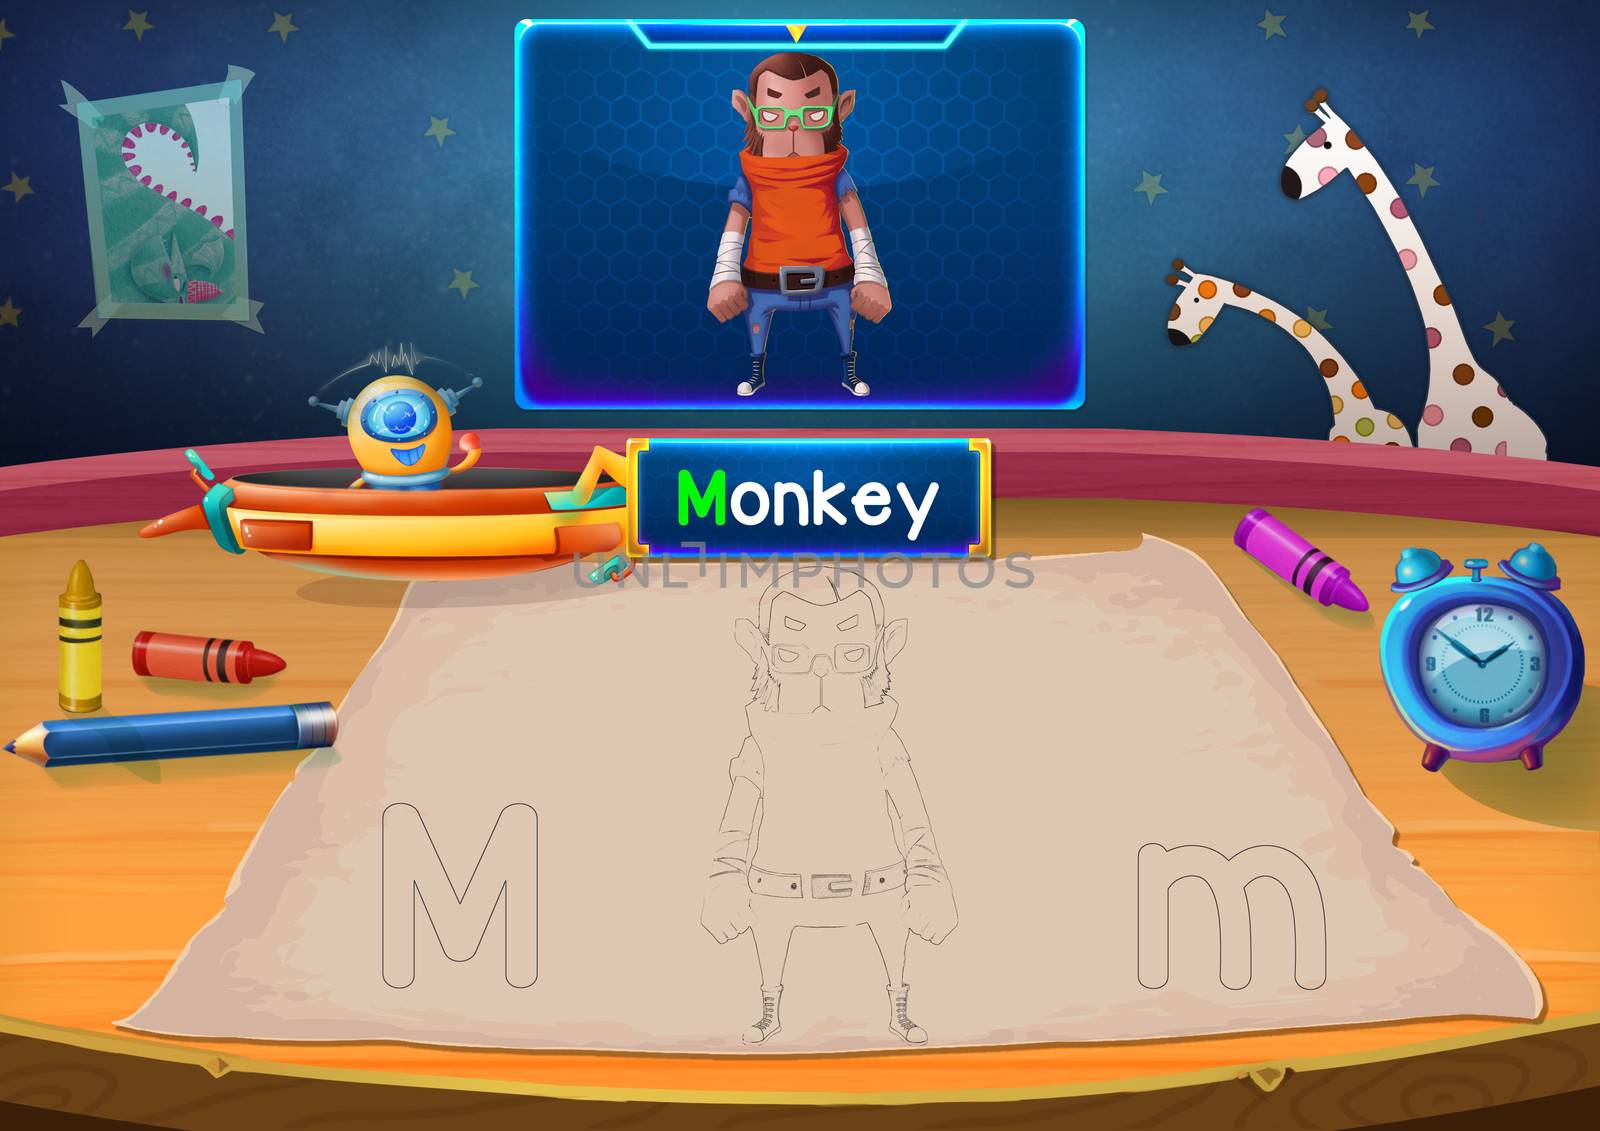 Illustration: Martian Class: M - Monkey. The Martian in this picture opens a class for all Aliens. You must follow and use crayons coloring the outlines below. Fantastic Sci-Fi Cartoon Scene Design.